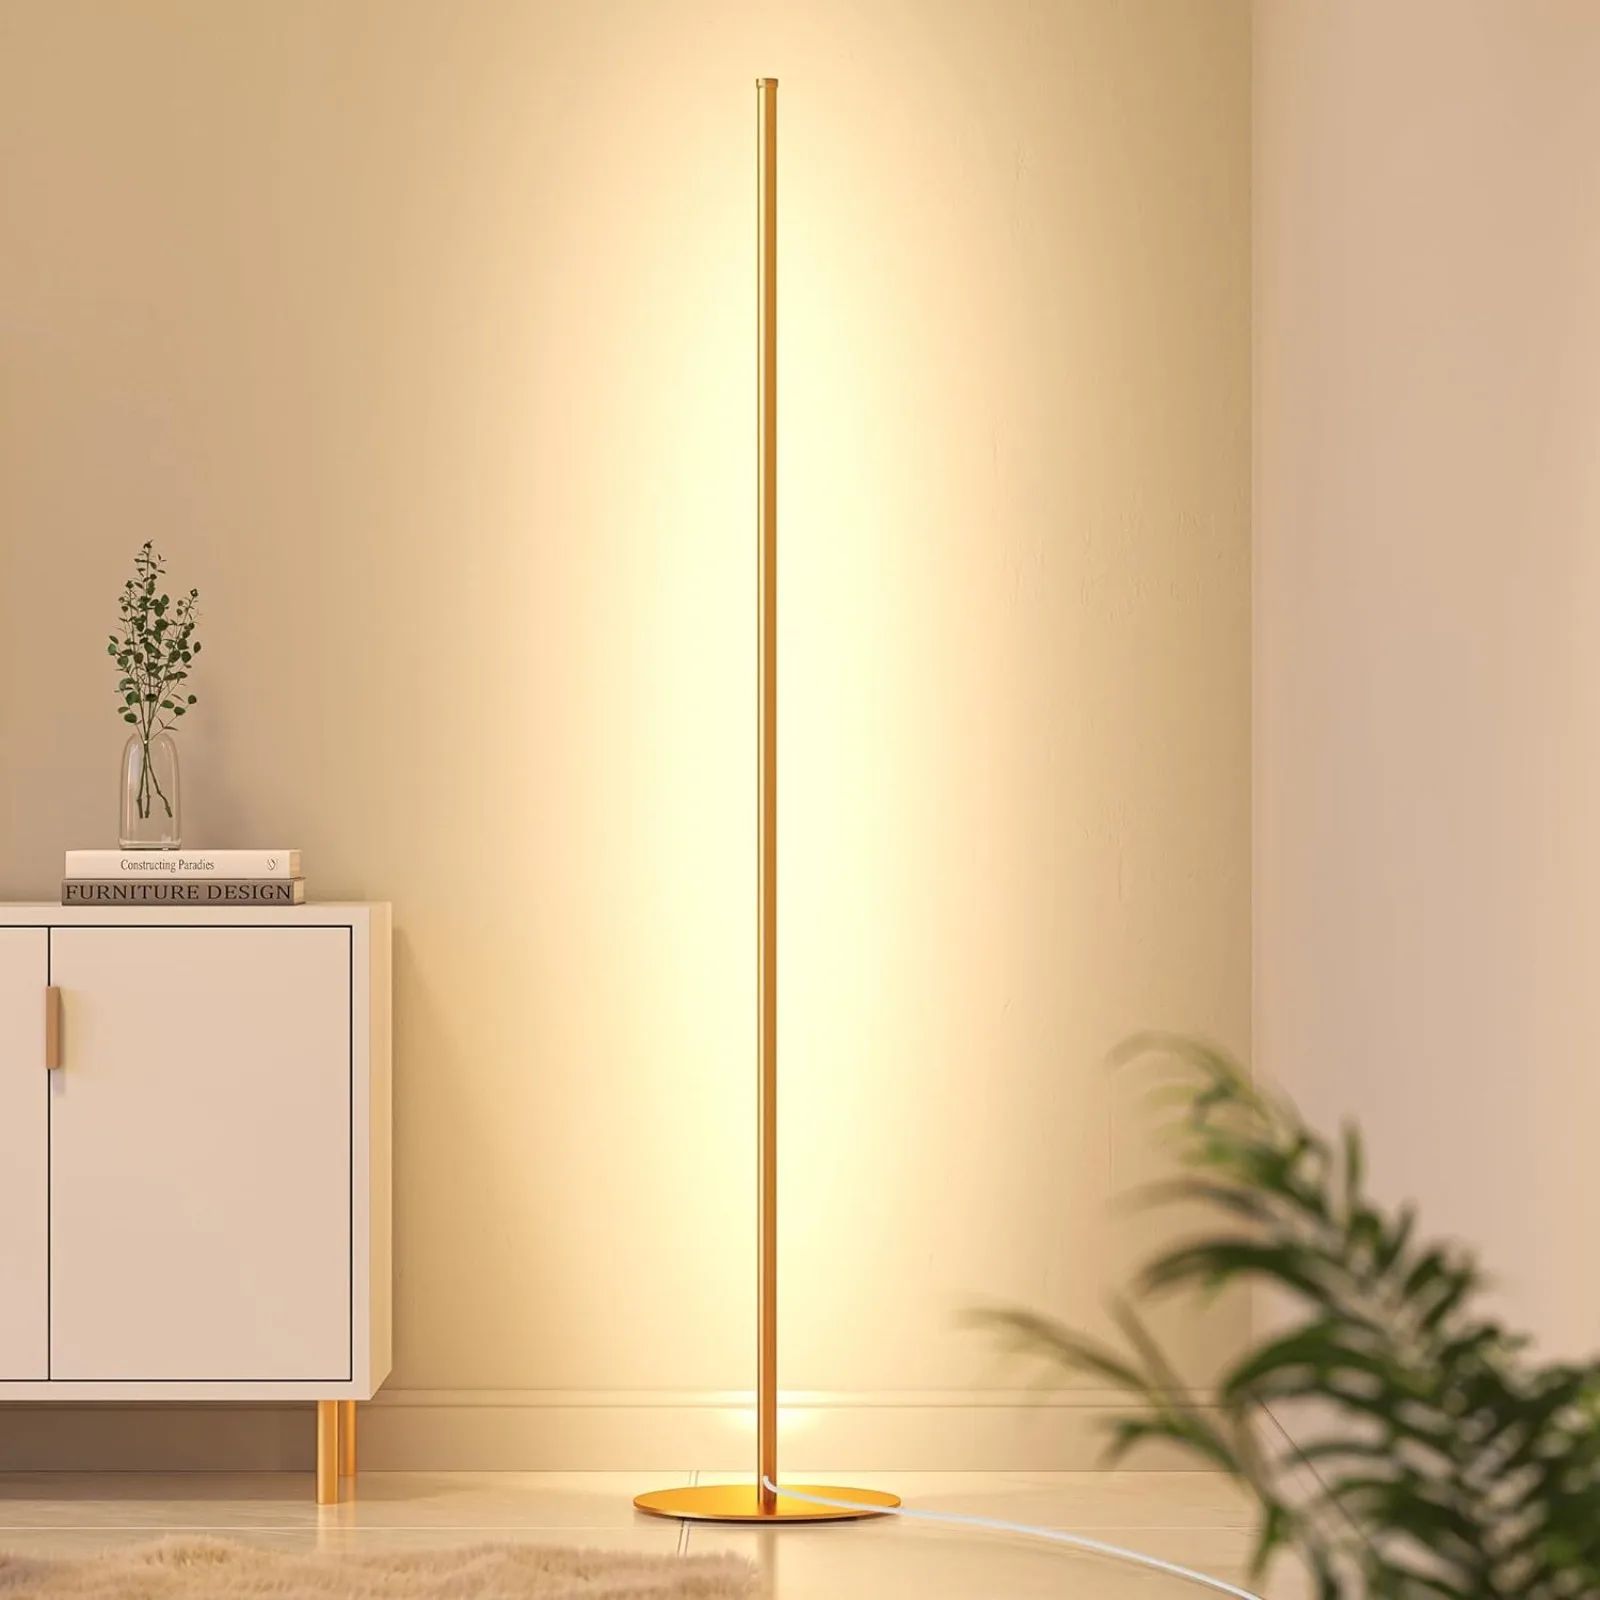 us-rgbw-led-corner-floor-lamp-with-remote-575-minimalist-dimmable-atmosphere-light